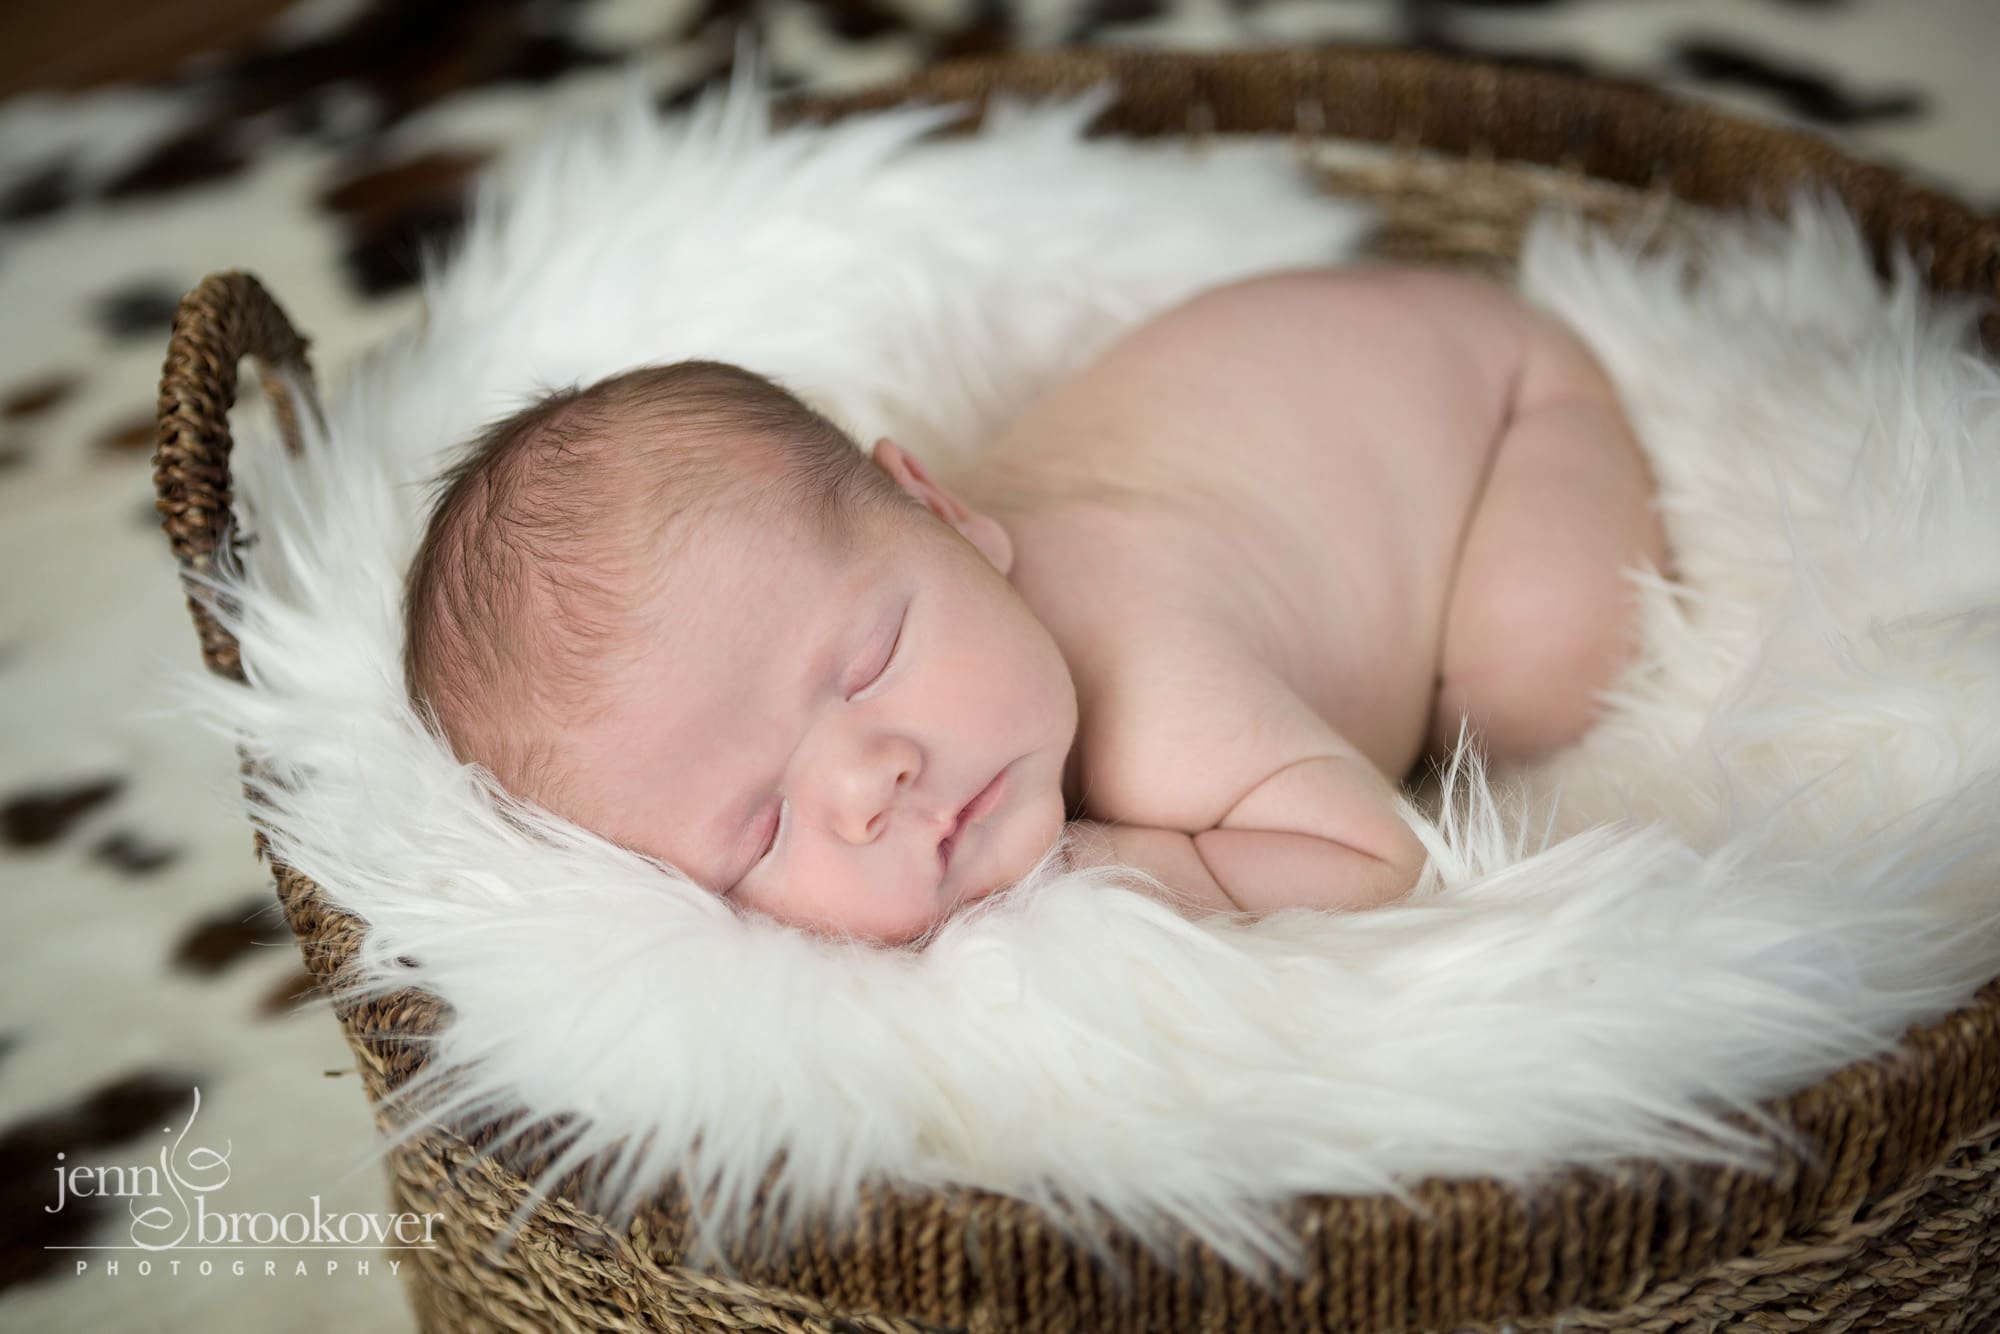 newborn boy on belly snuggling in fur during photo session, cow fur rug